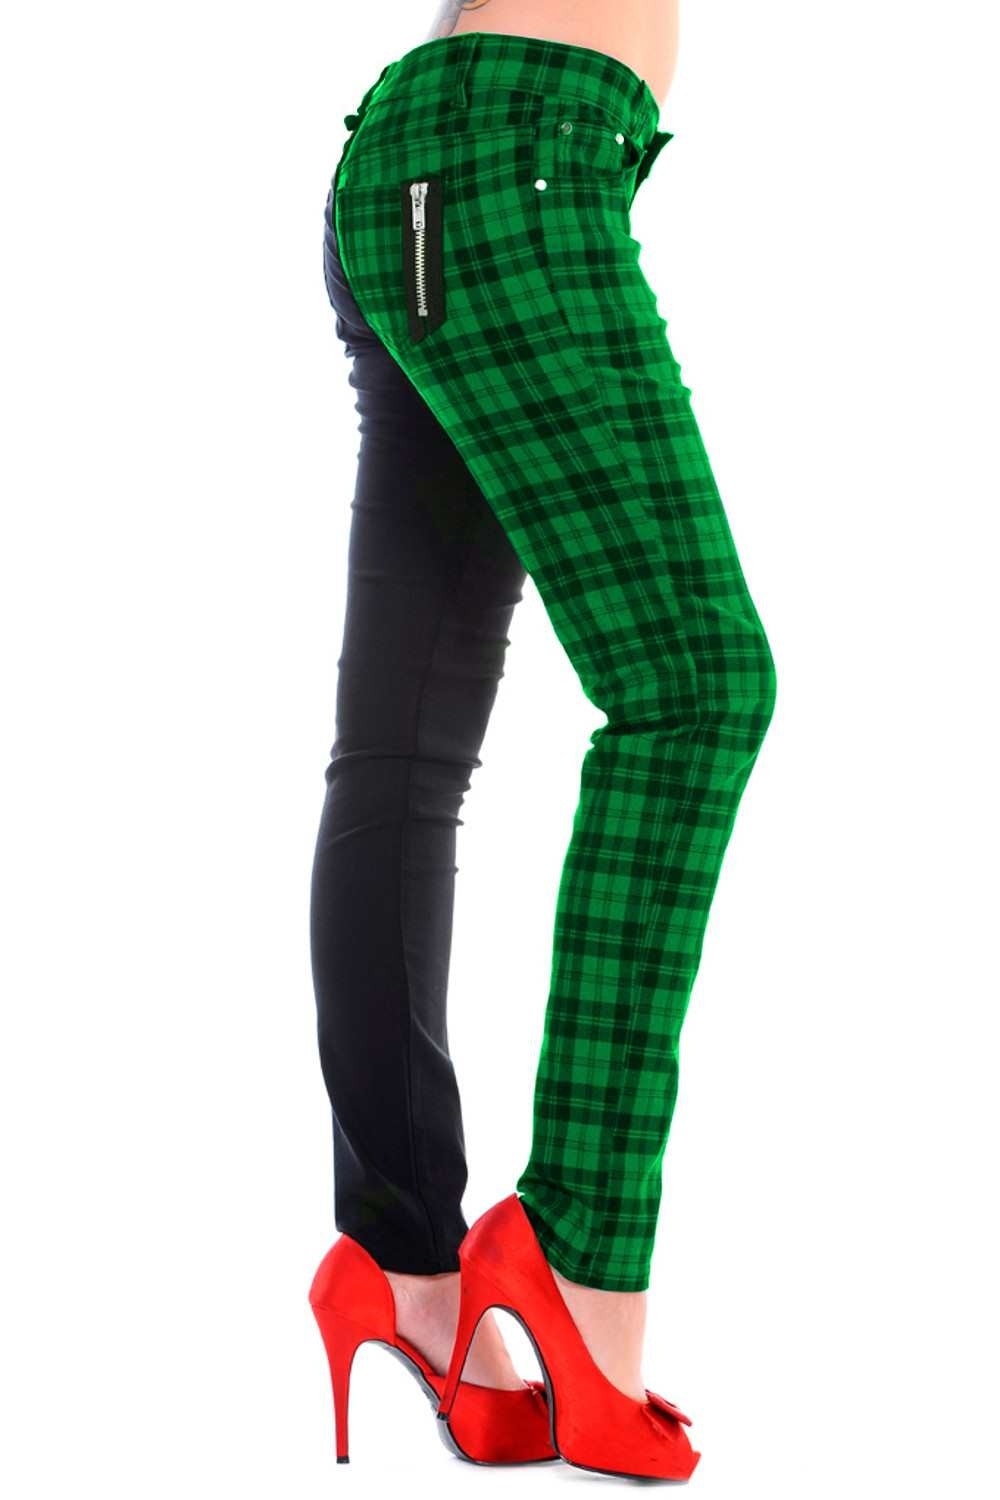 Green tartan check trousers with one leg black, low rise. 